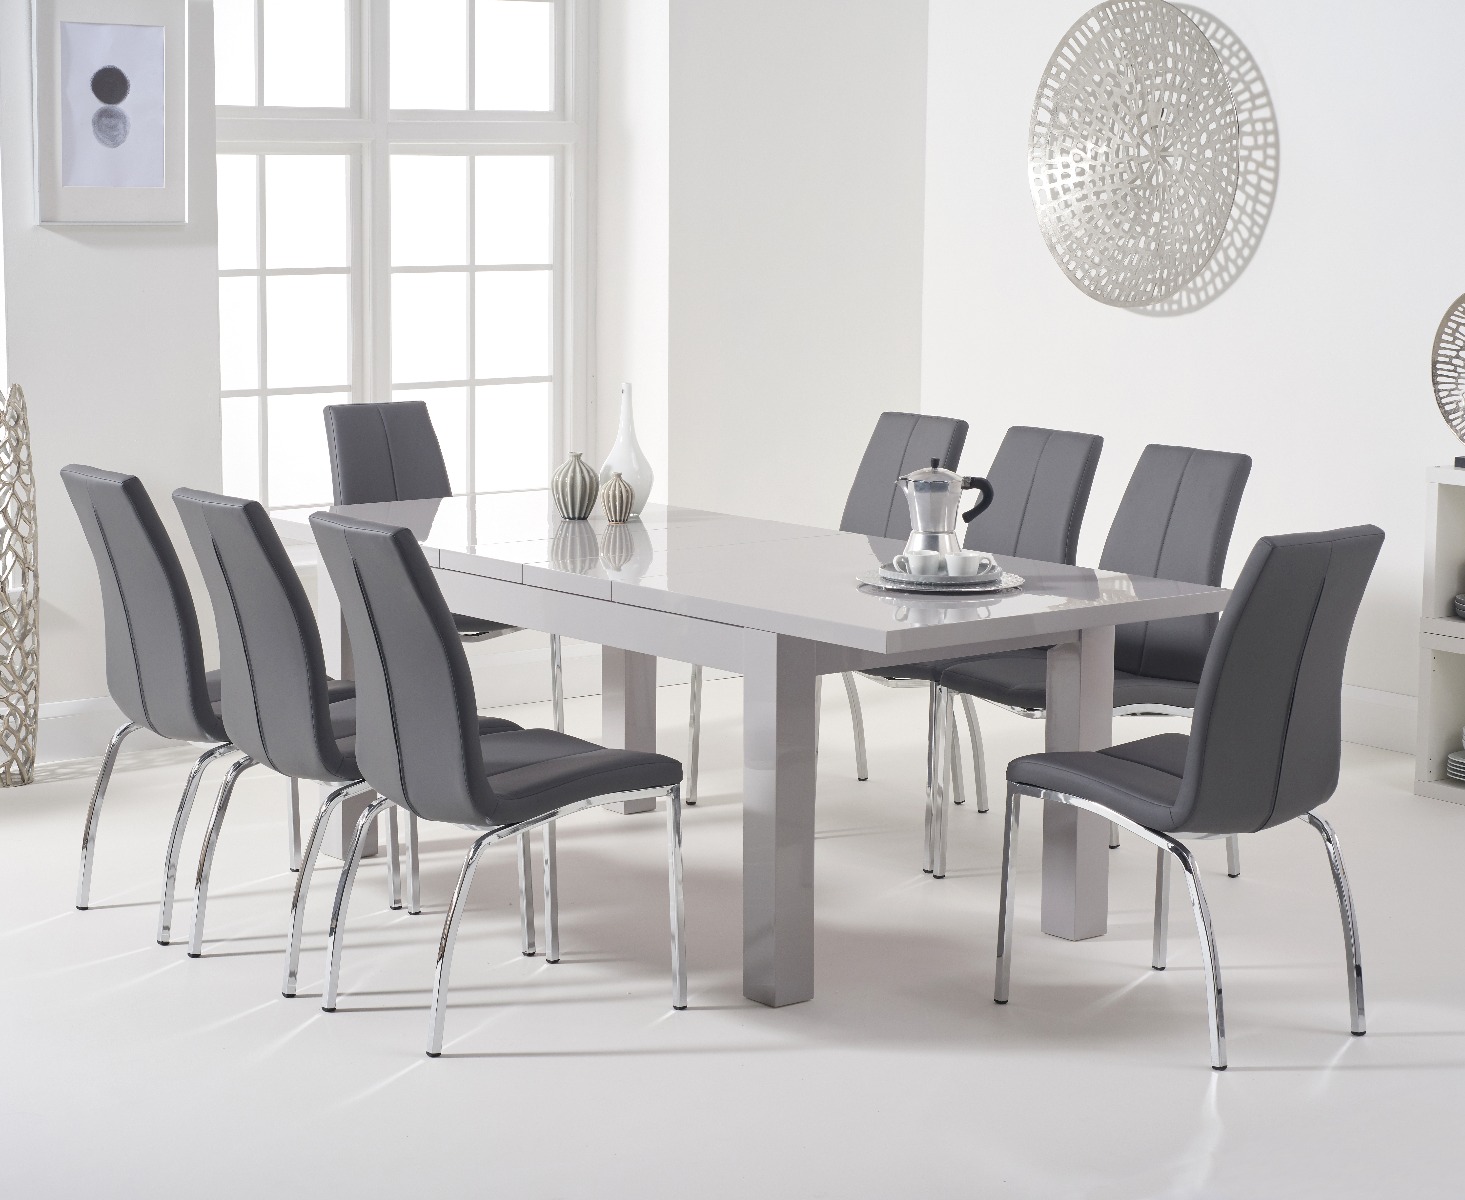 Atlanta Light Grey Gloss 160220cm Extending Dining Table With 8 Black Cavello Chairs